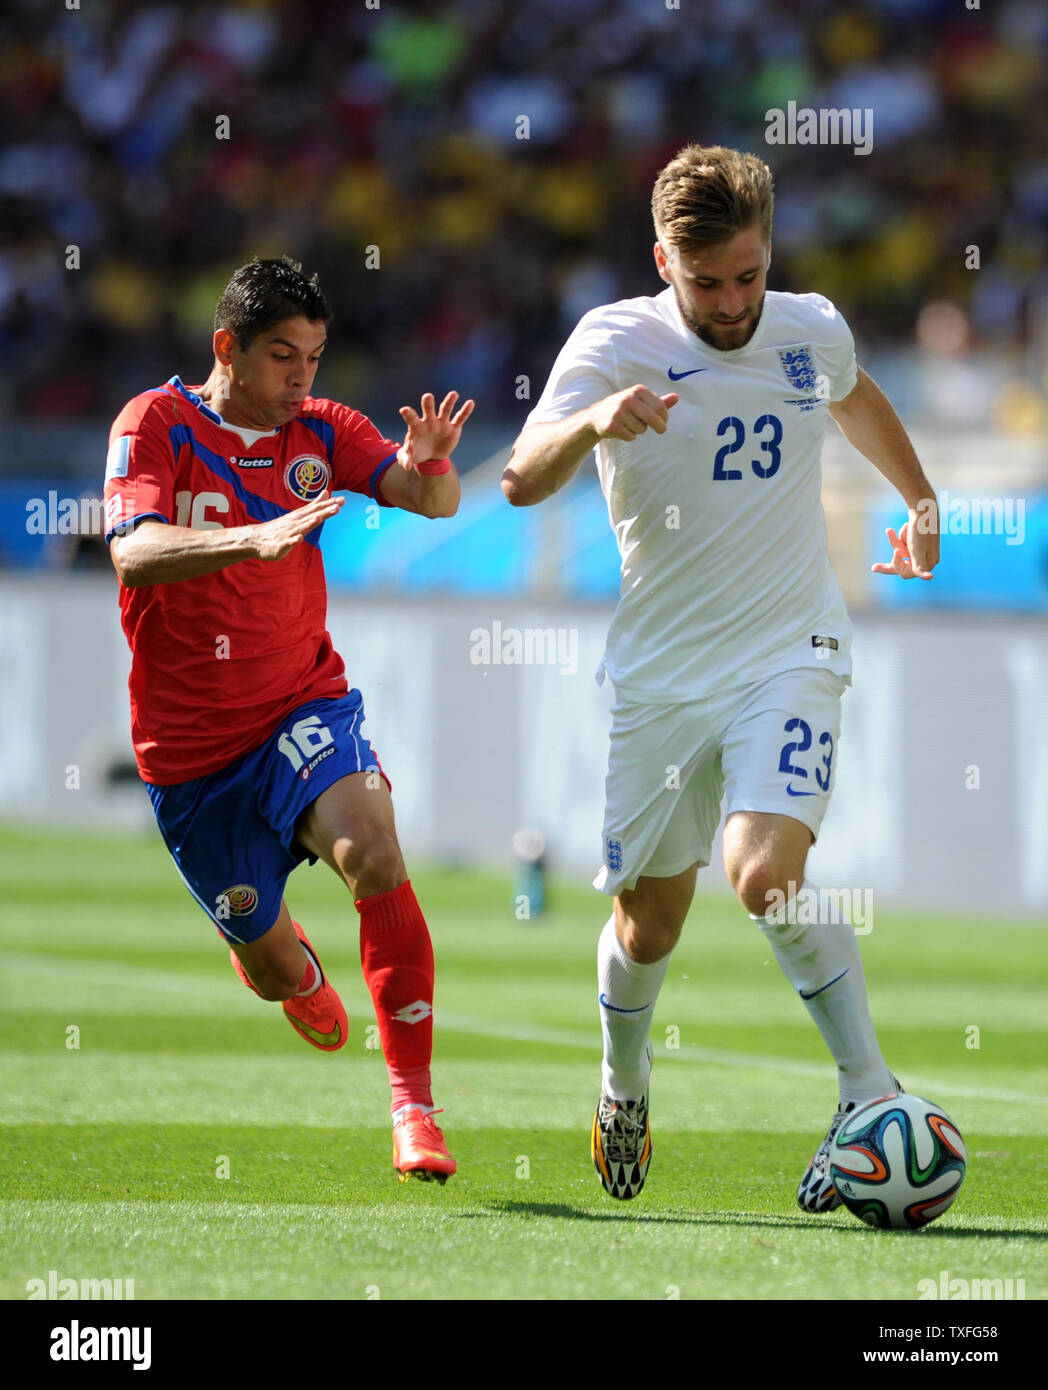 Cristian Gamboa (L) of Costa Rica chases Luke Shaw of England during the 2014 FIFA World Cup Group D match at the Estadio Mineirao in Belo Horizonte, Brazil on June 24, 2014. UPI/Chris Brunskill Stock Photo